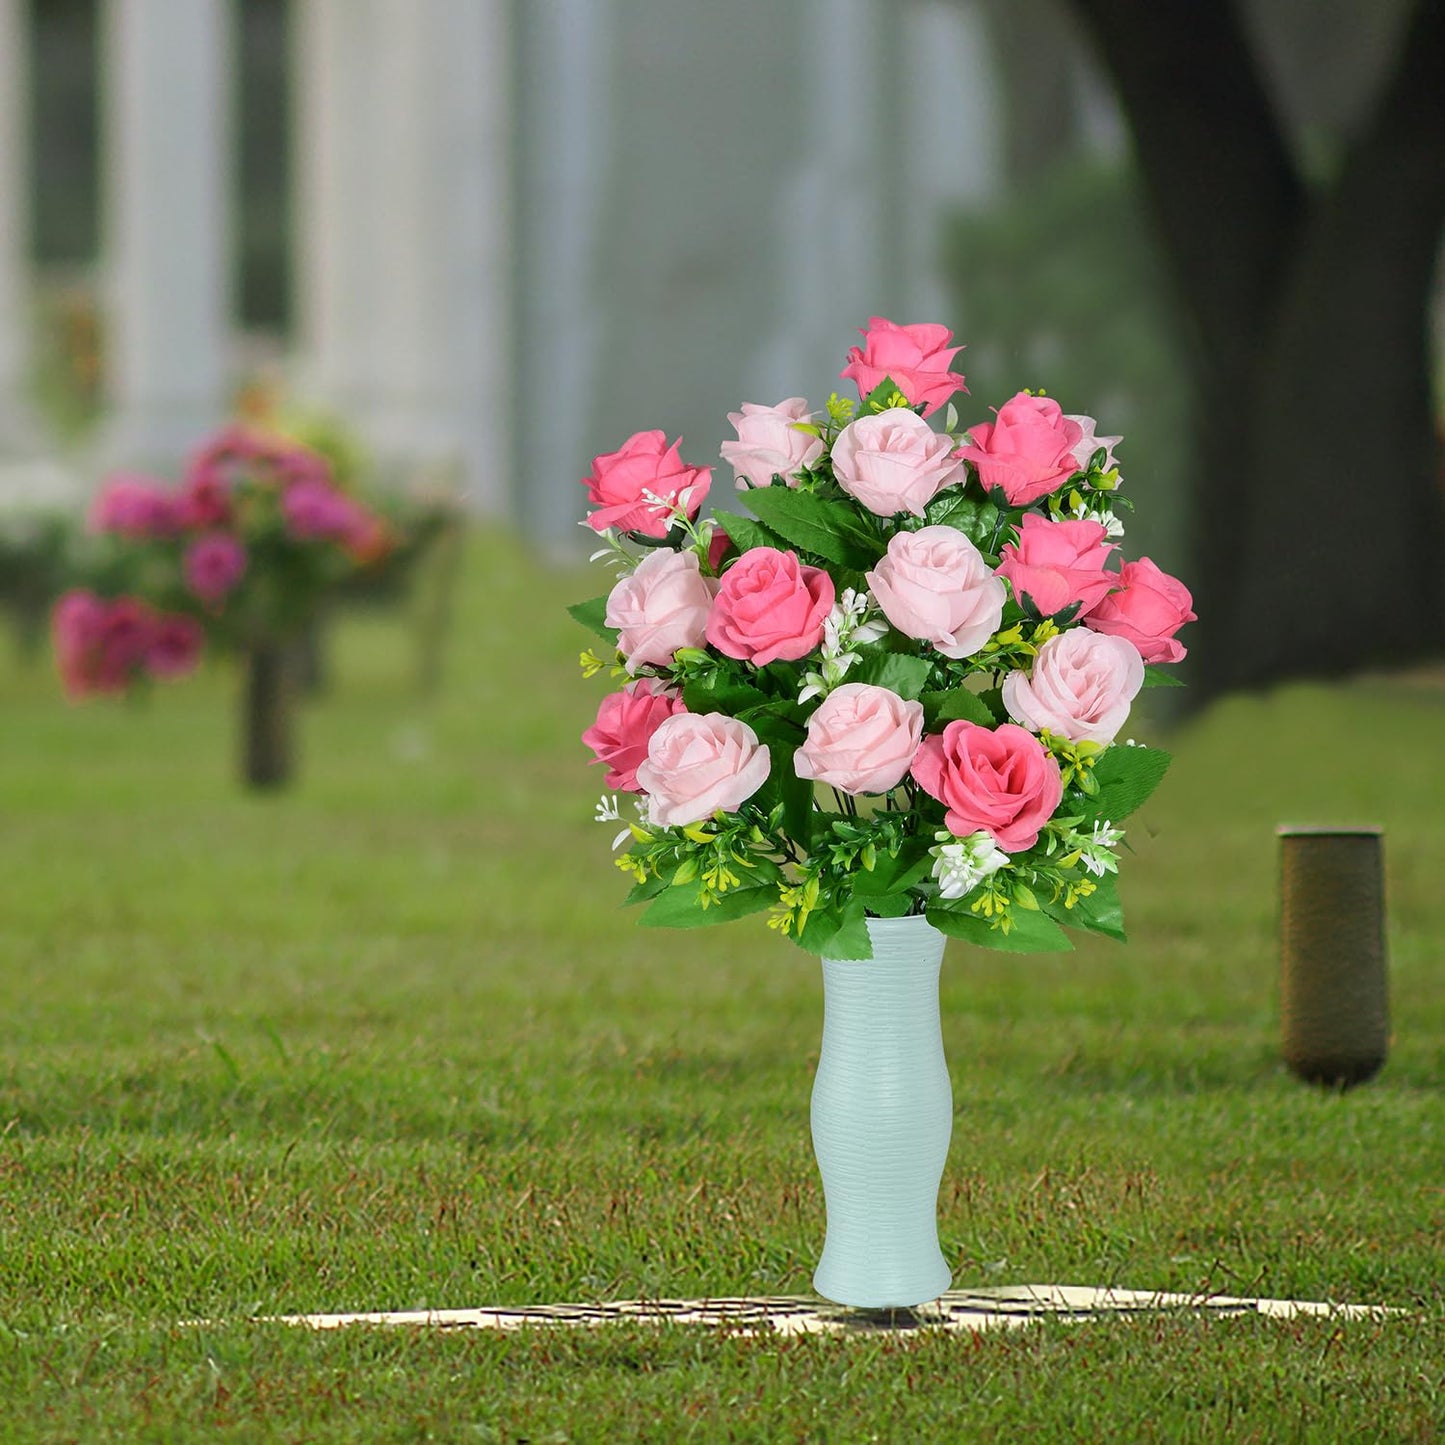 AOFOX Artificial Cemetery Flowers with Vase, Headstone Flowers Rose Bouquet, Graveyard Memorial Flowers for Grave Arrangements Set of 2 (Pink)